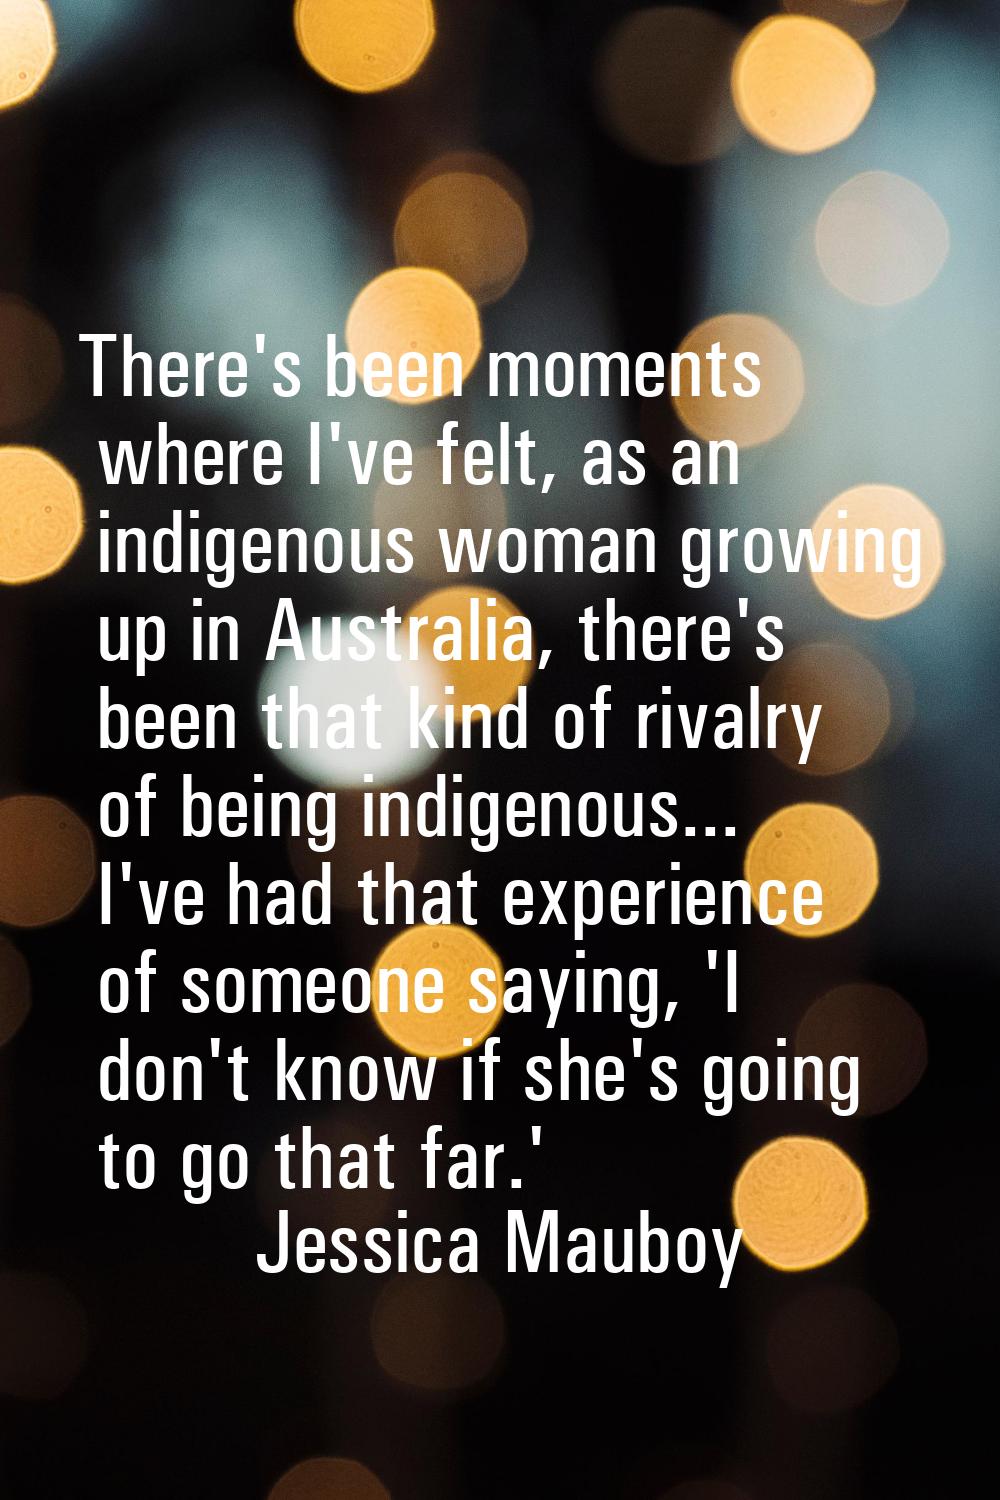 There's been moments where I've felt, as an indigenous woman growing up in Australia, there's been 